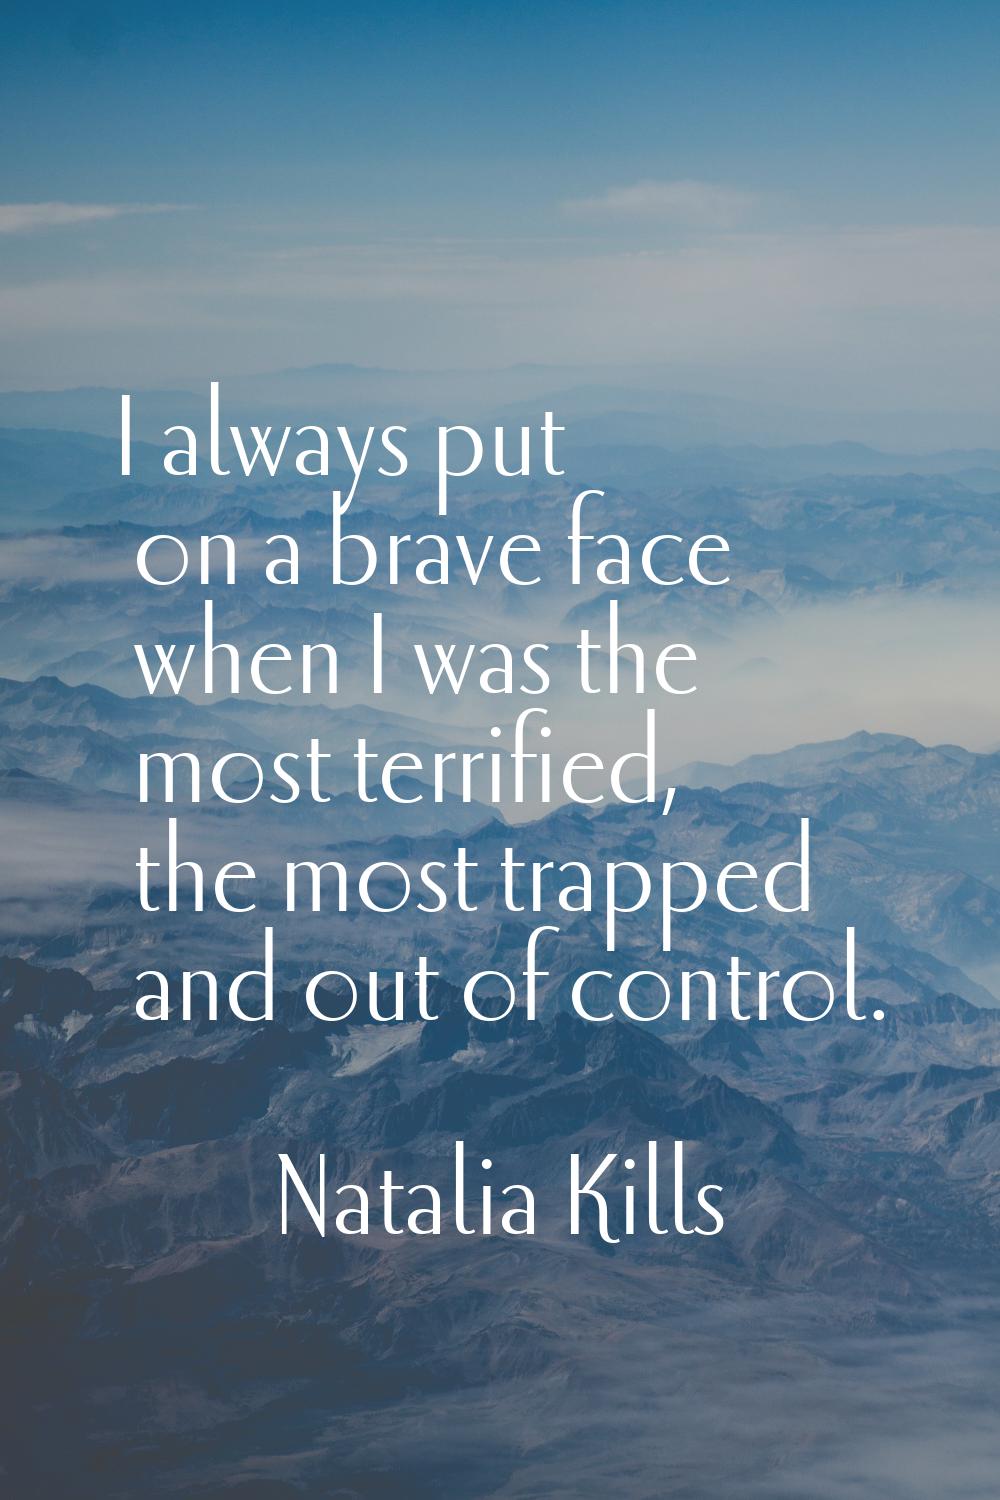 I always put on a brave face when I was the most terrified, the most trapped and out of control.